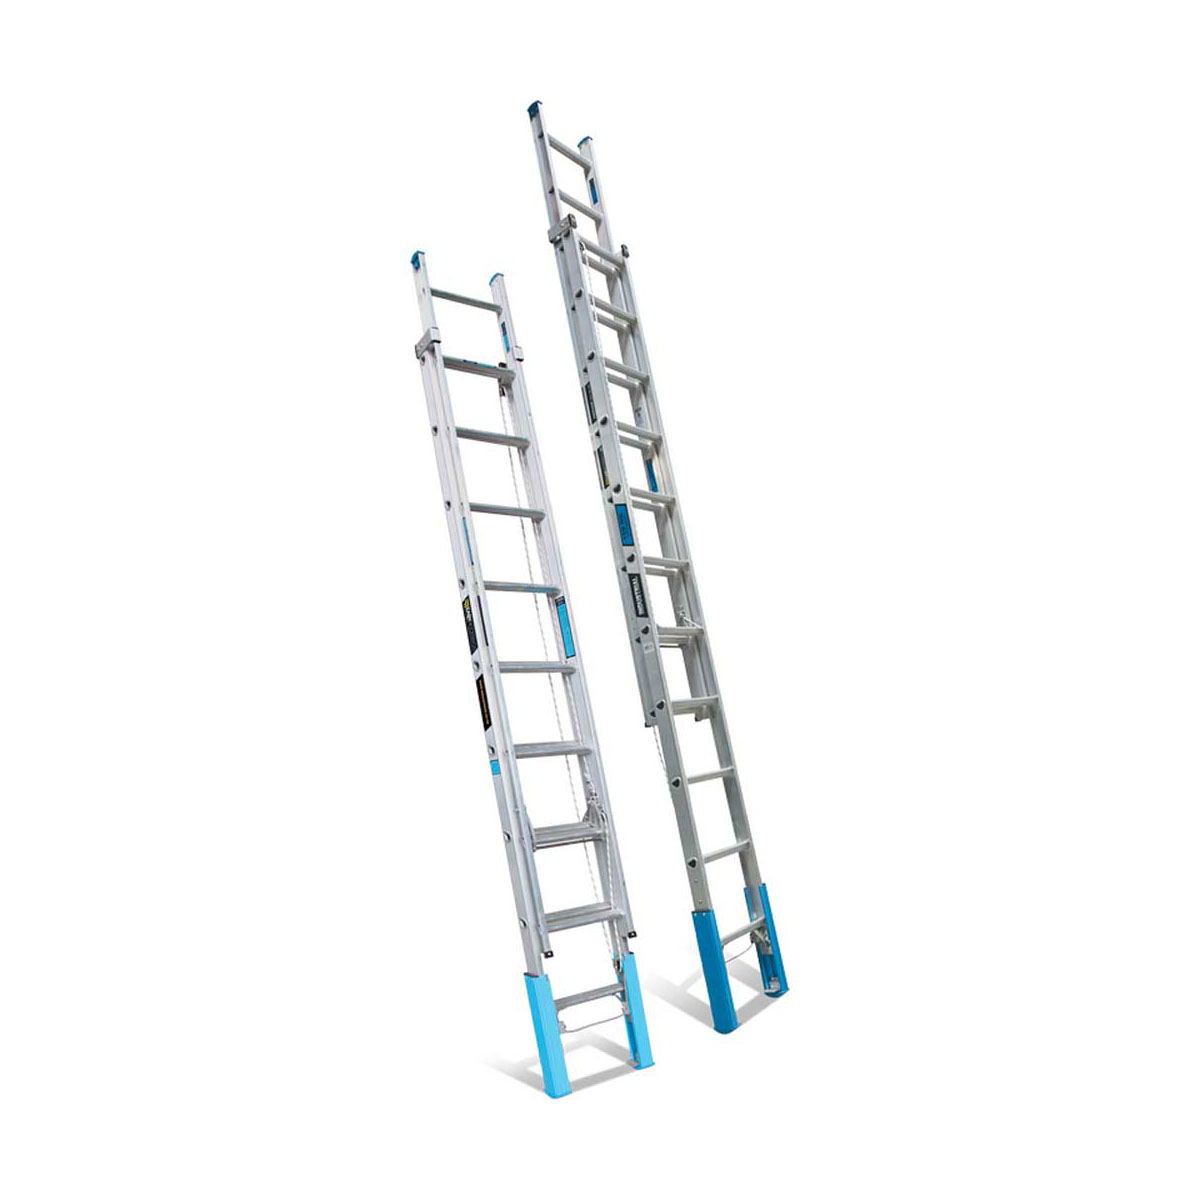 Buy Extension Ladders - Levelling-Feet  in Extension Ladders from Easy Access available at Astrolift NZ